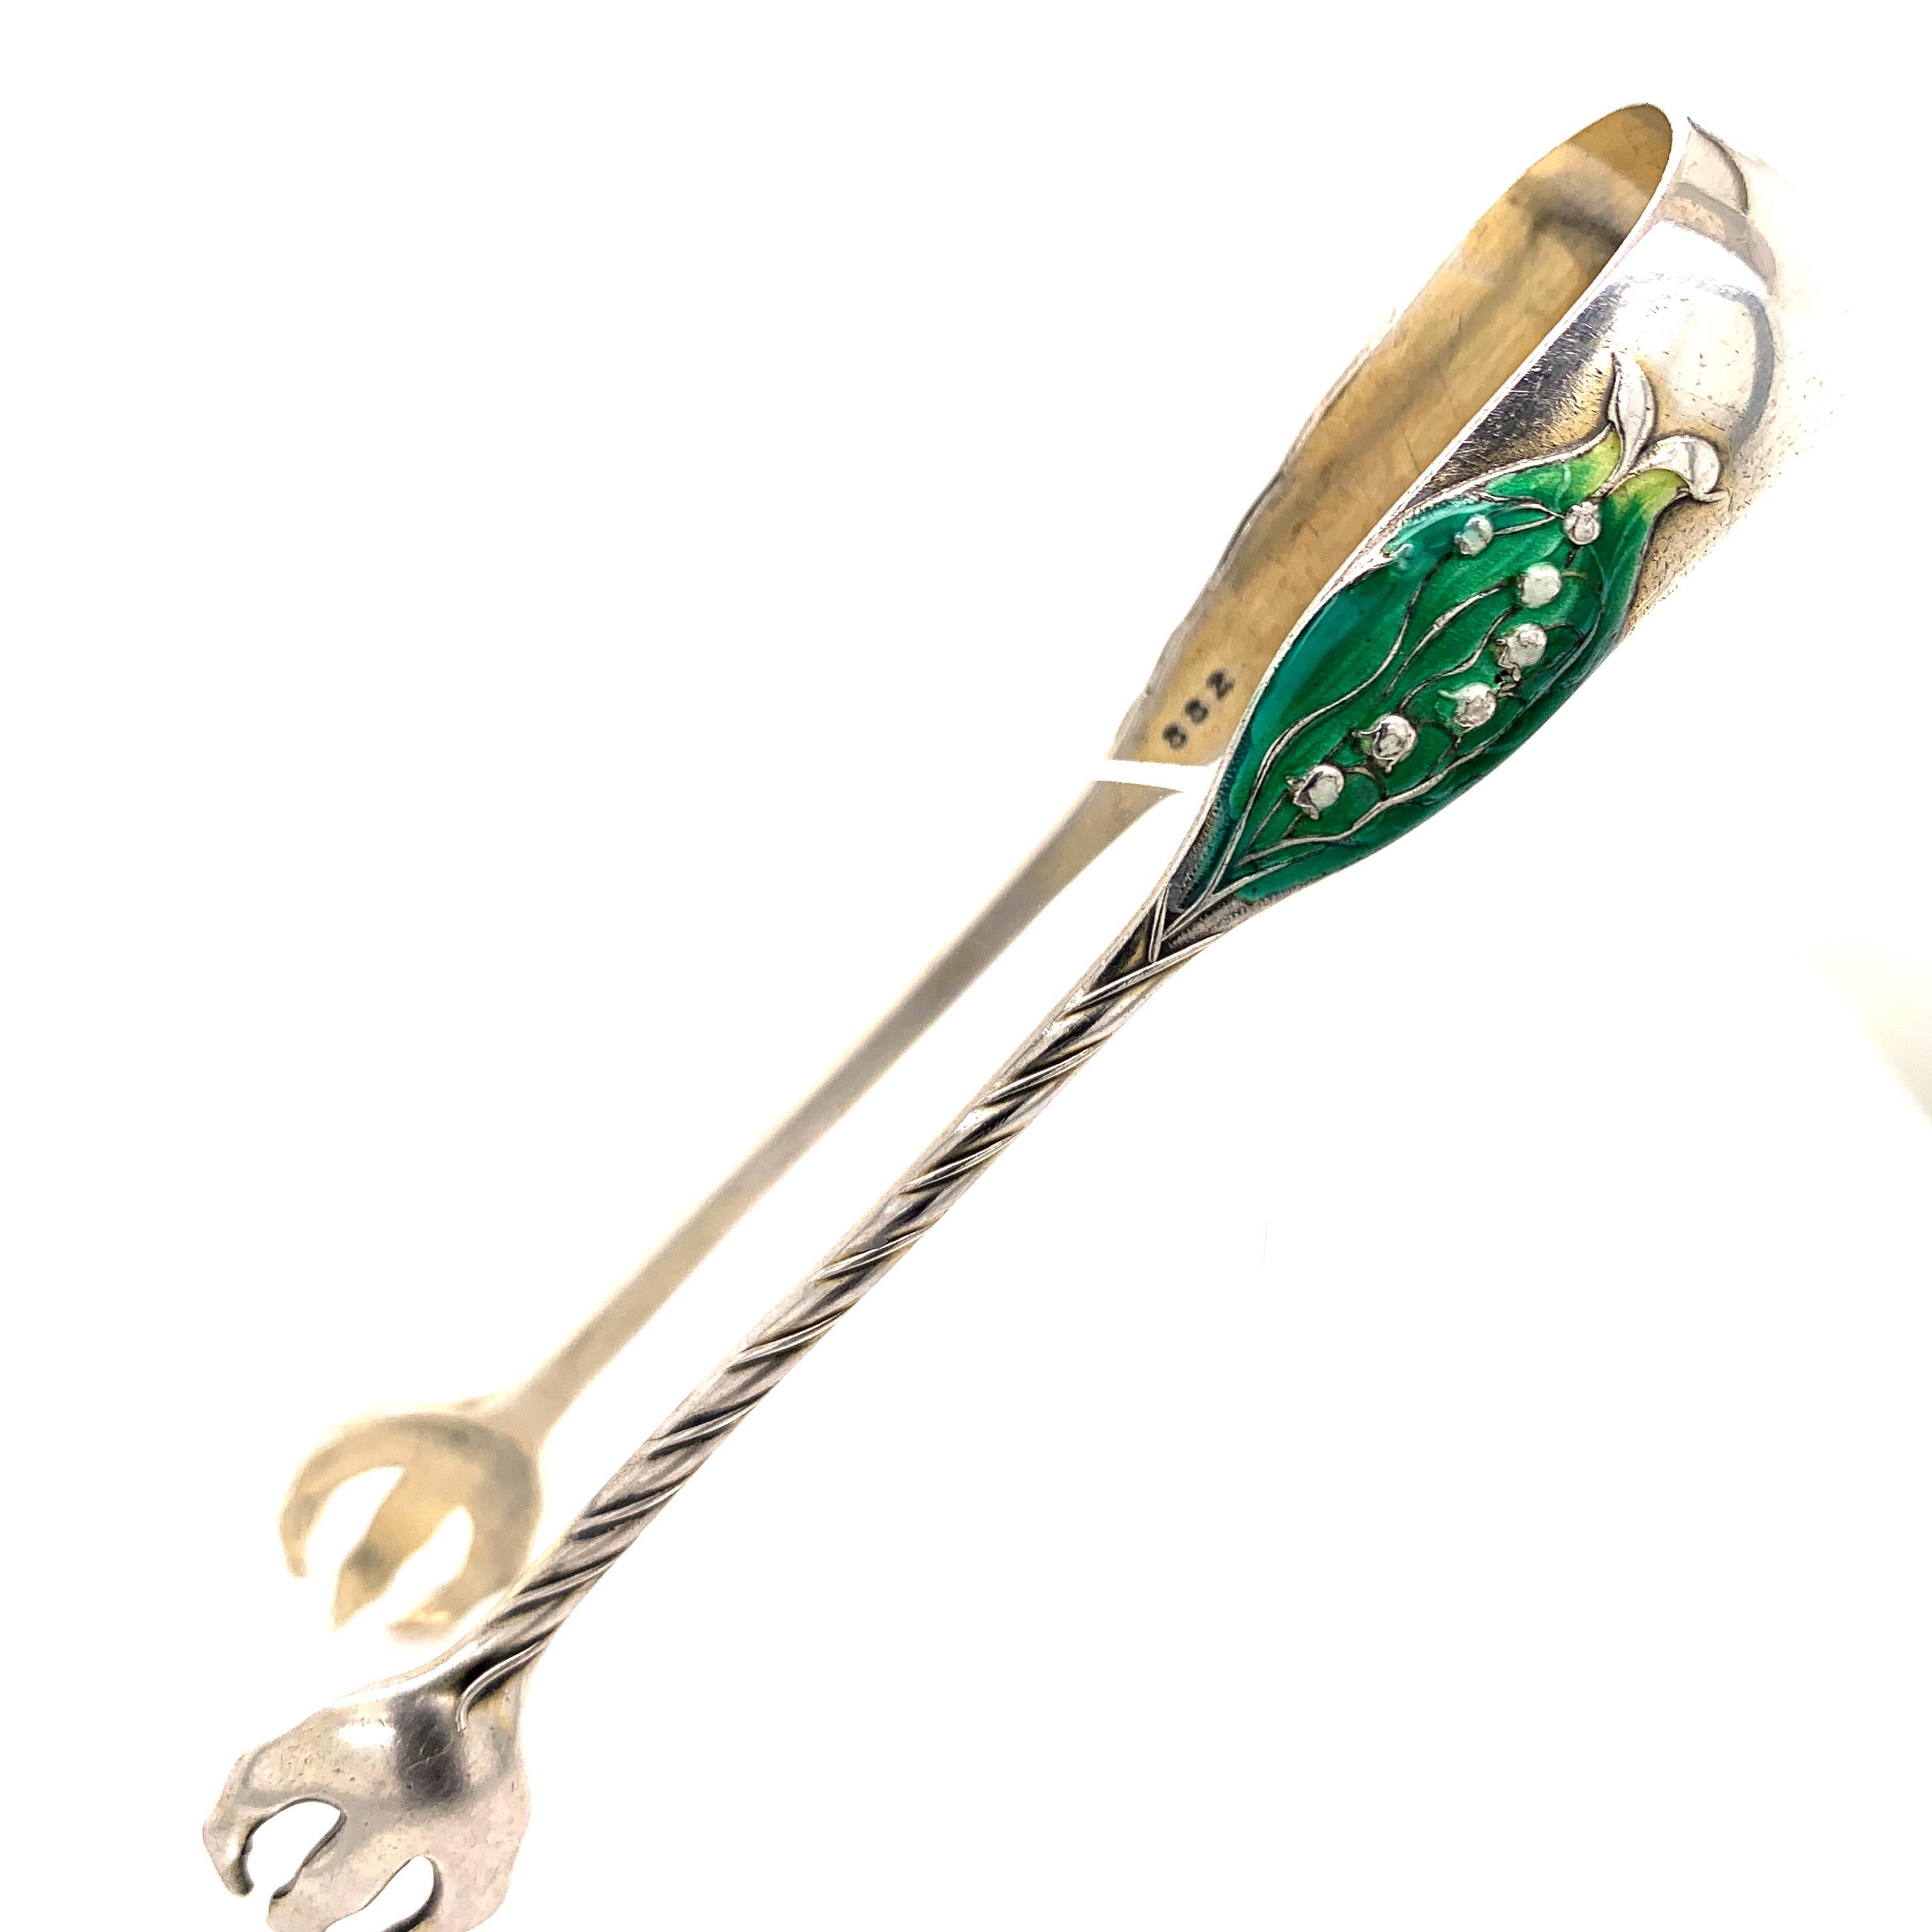 Beautiful antique sterling silver sugar tongs.  Made by GORHAM.  On the front, an enamel 